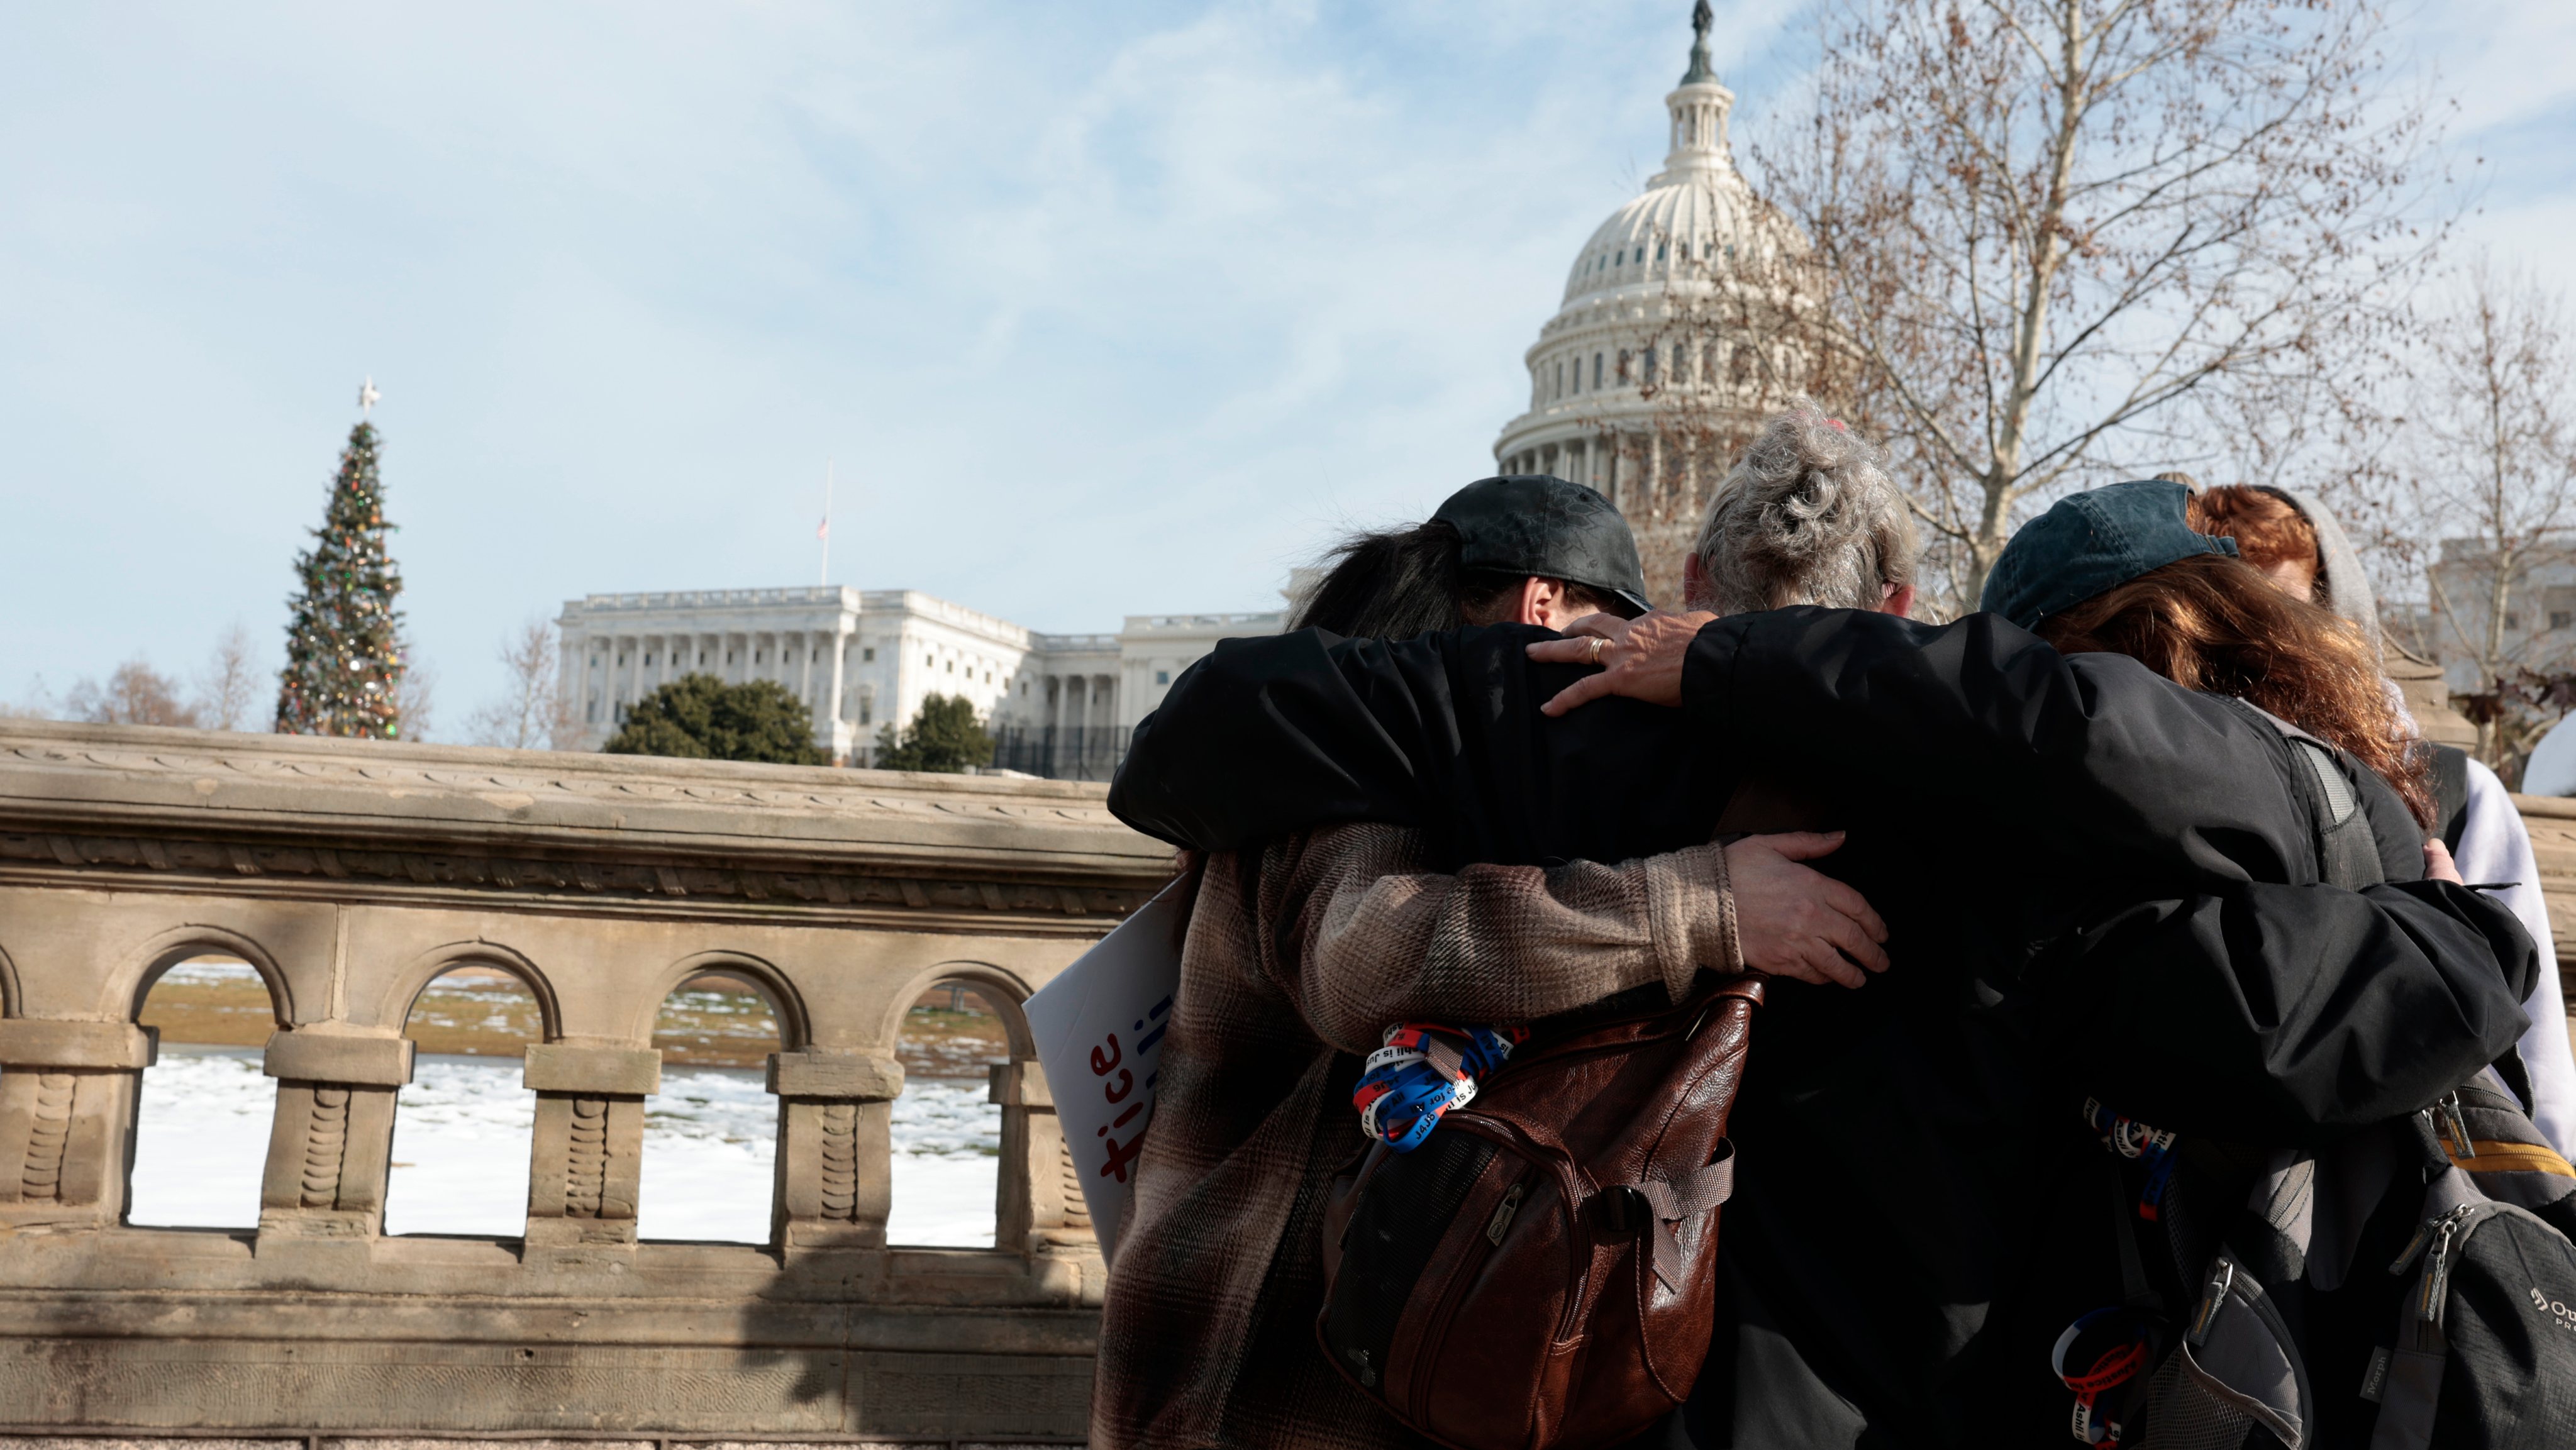 U.S. Capitol Commemorates First Anniversary Of January 6 Attack